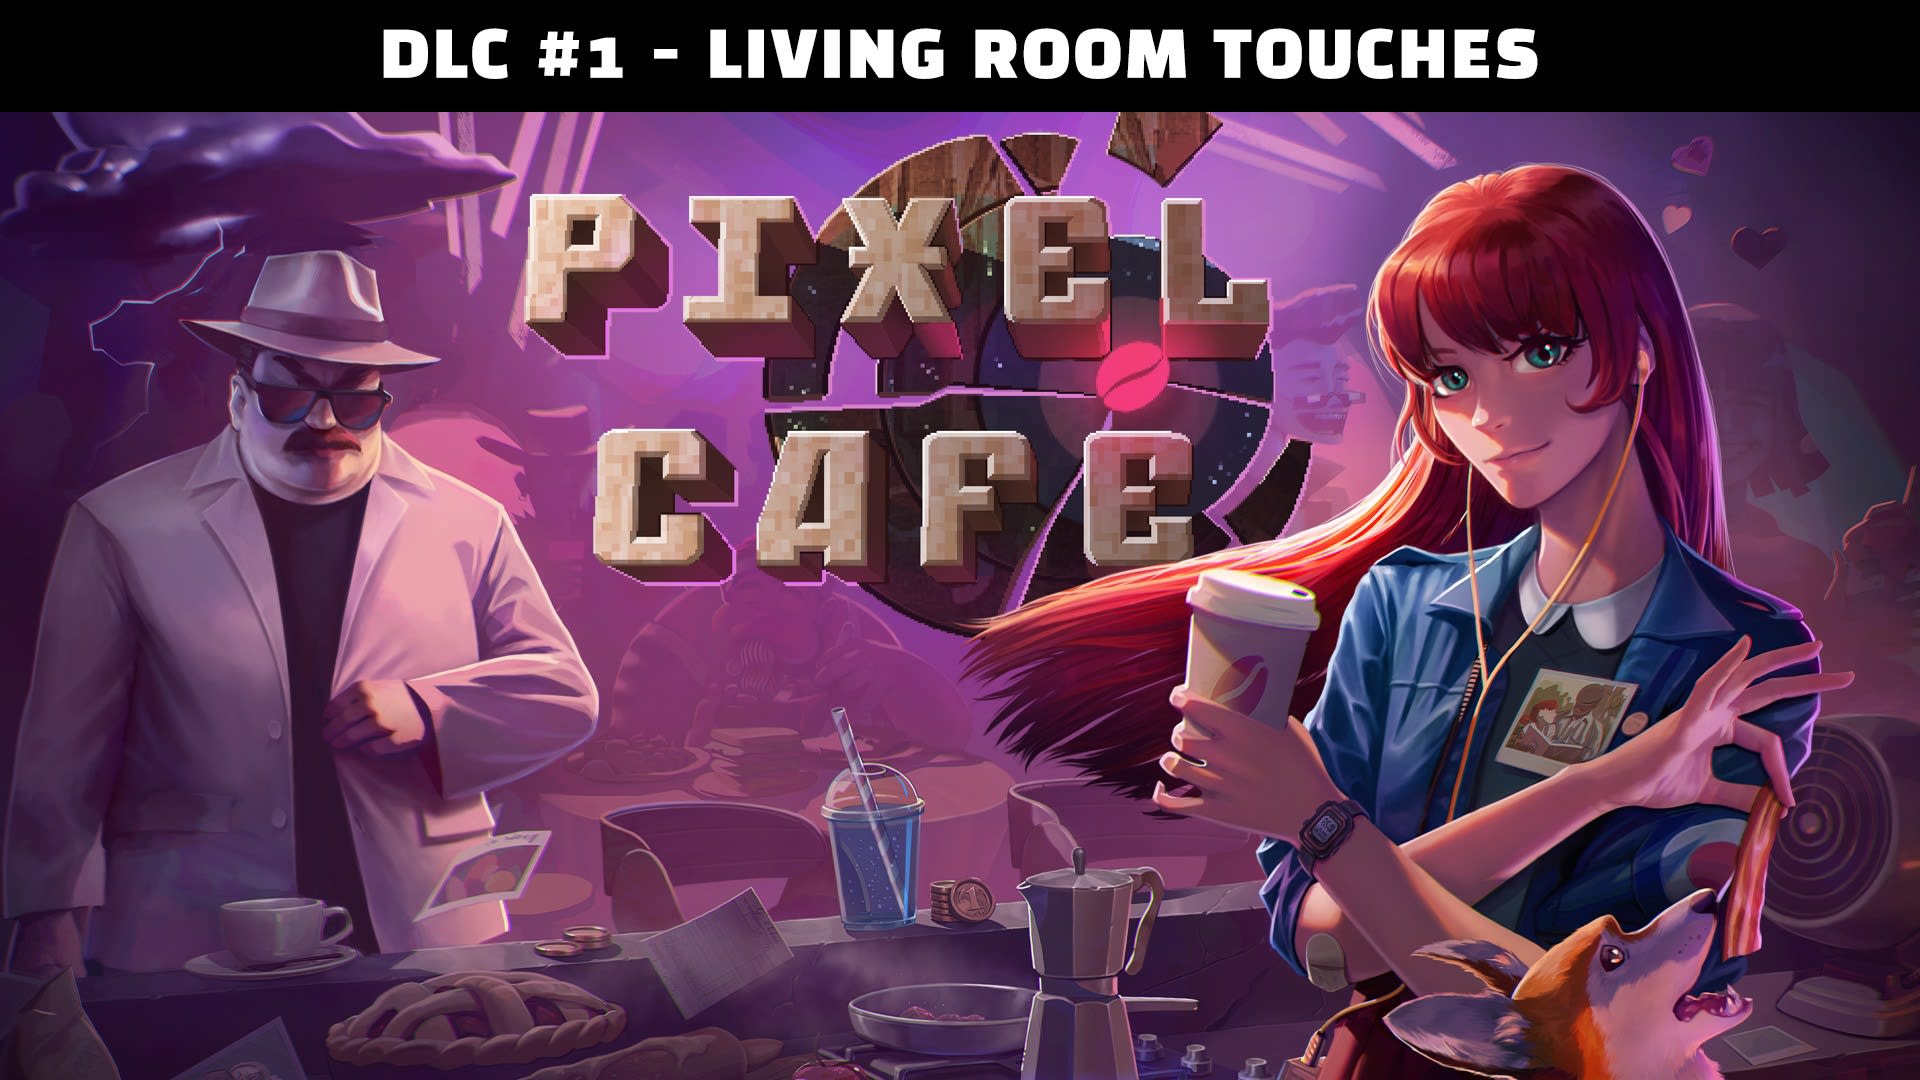 Pixel Cafe DLC #1 - Living Room Touches 1